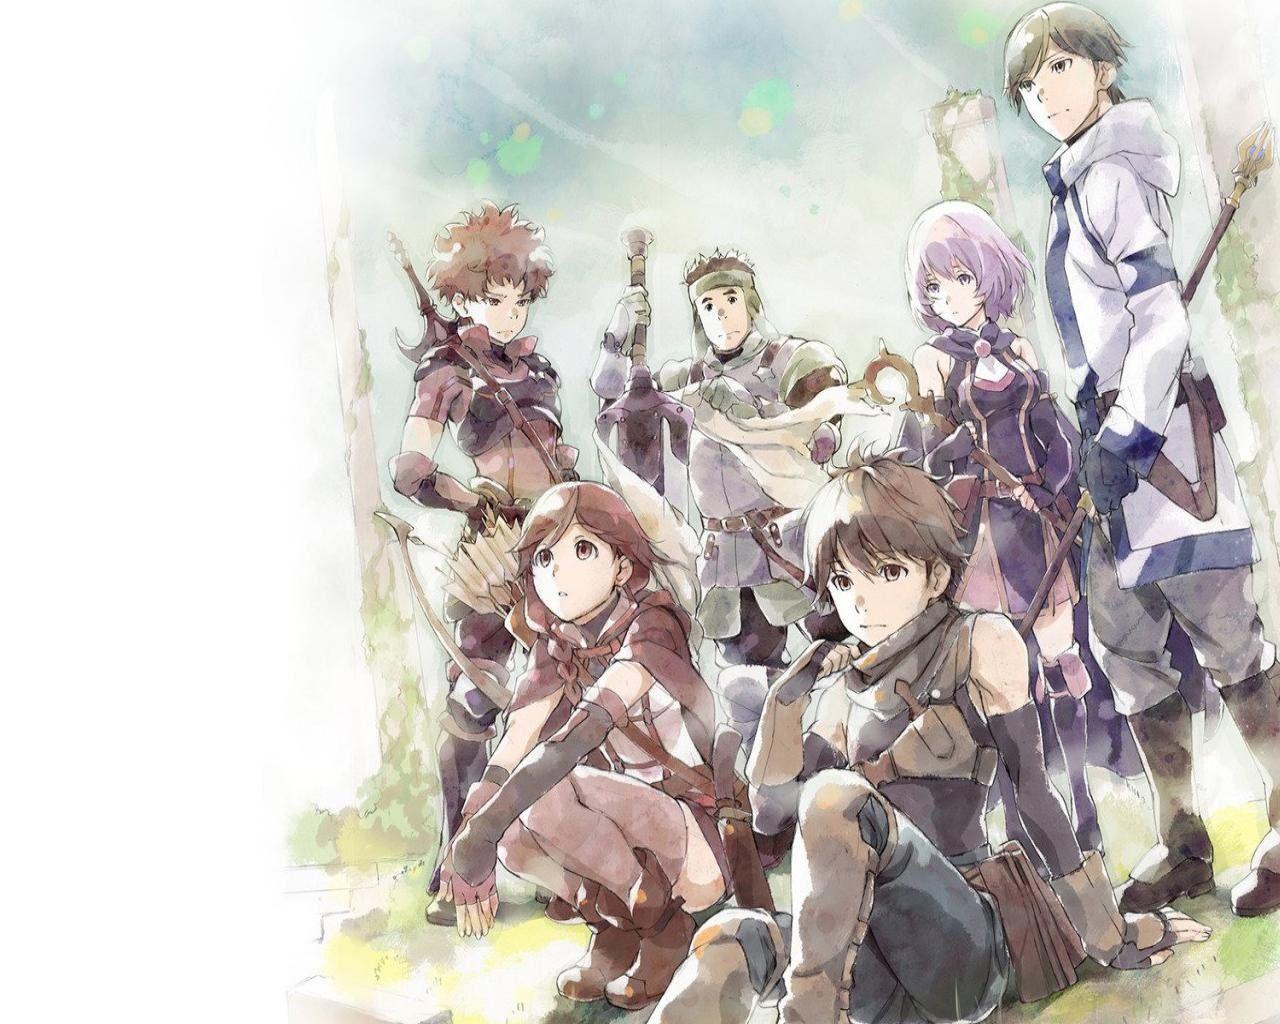 myReviewercom  Review for Grimgar Ashes and Illusions